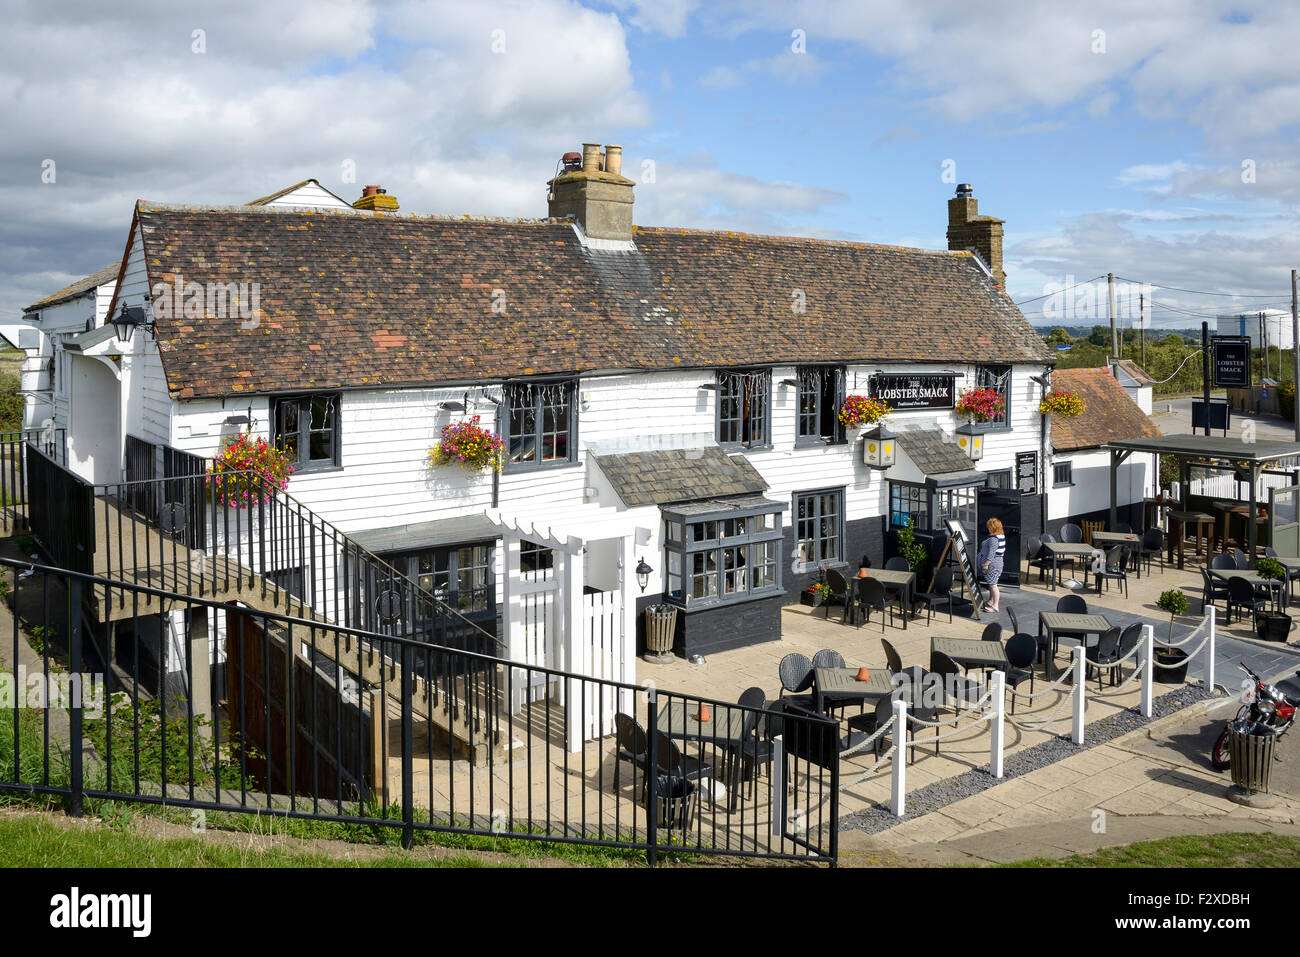 Le Lobster Smack Pub, Haven Road, Wickford, Essex, Angleterre, Royaume-Uni Banque D'Images